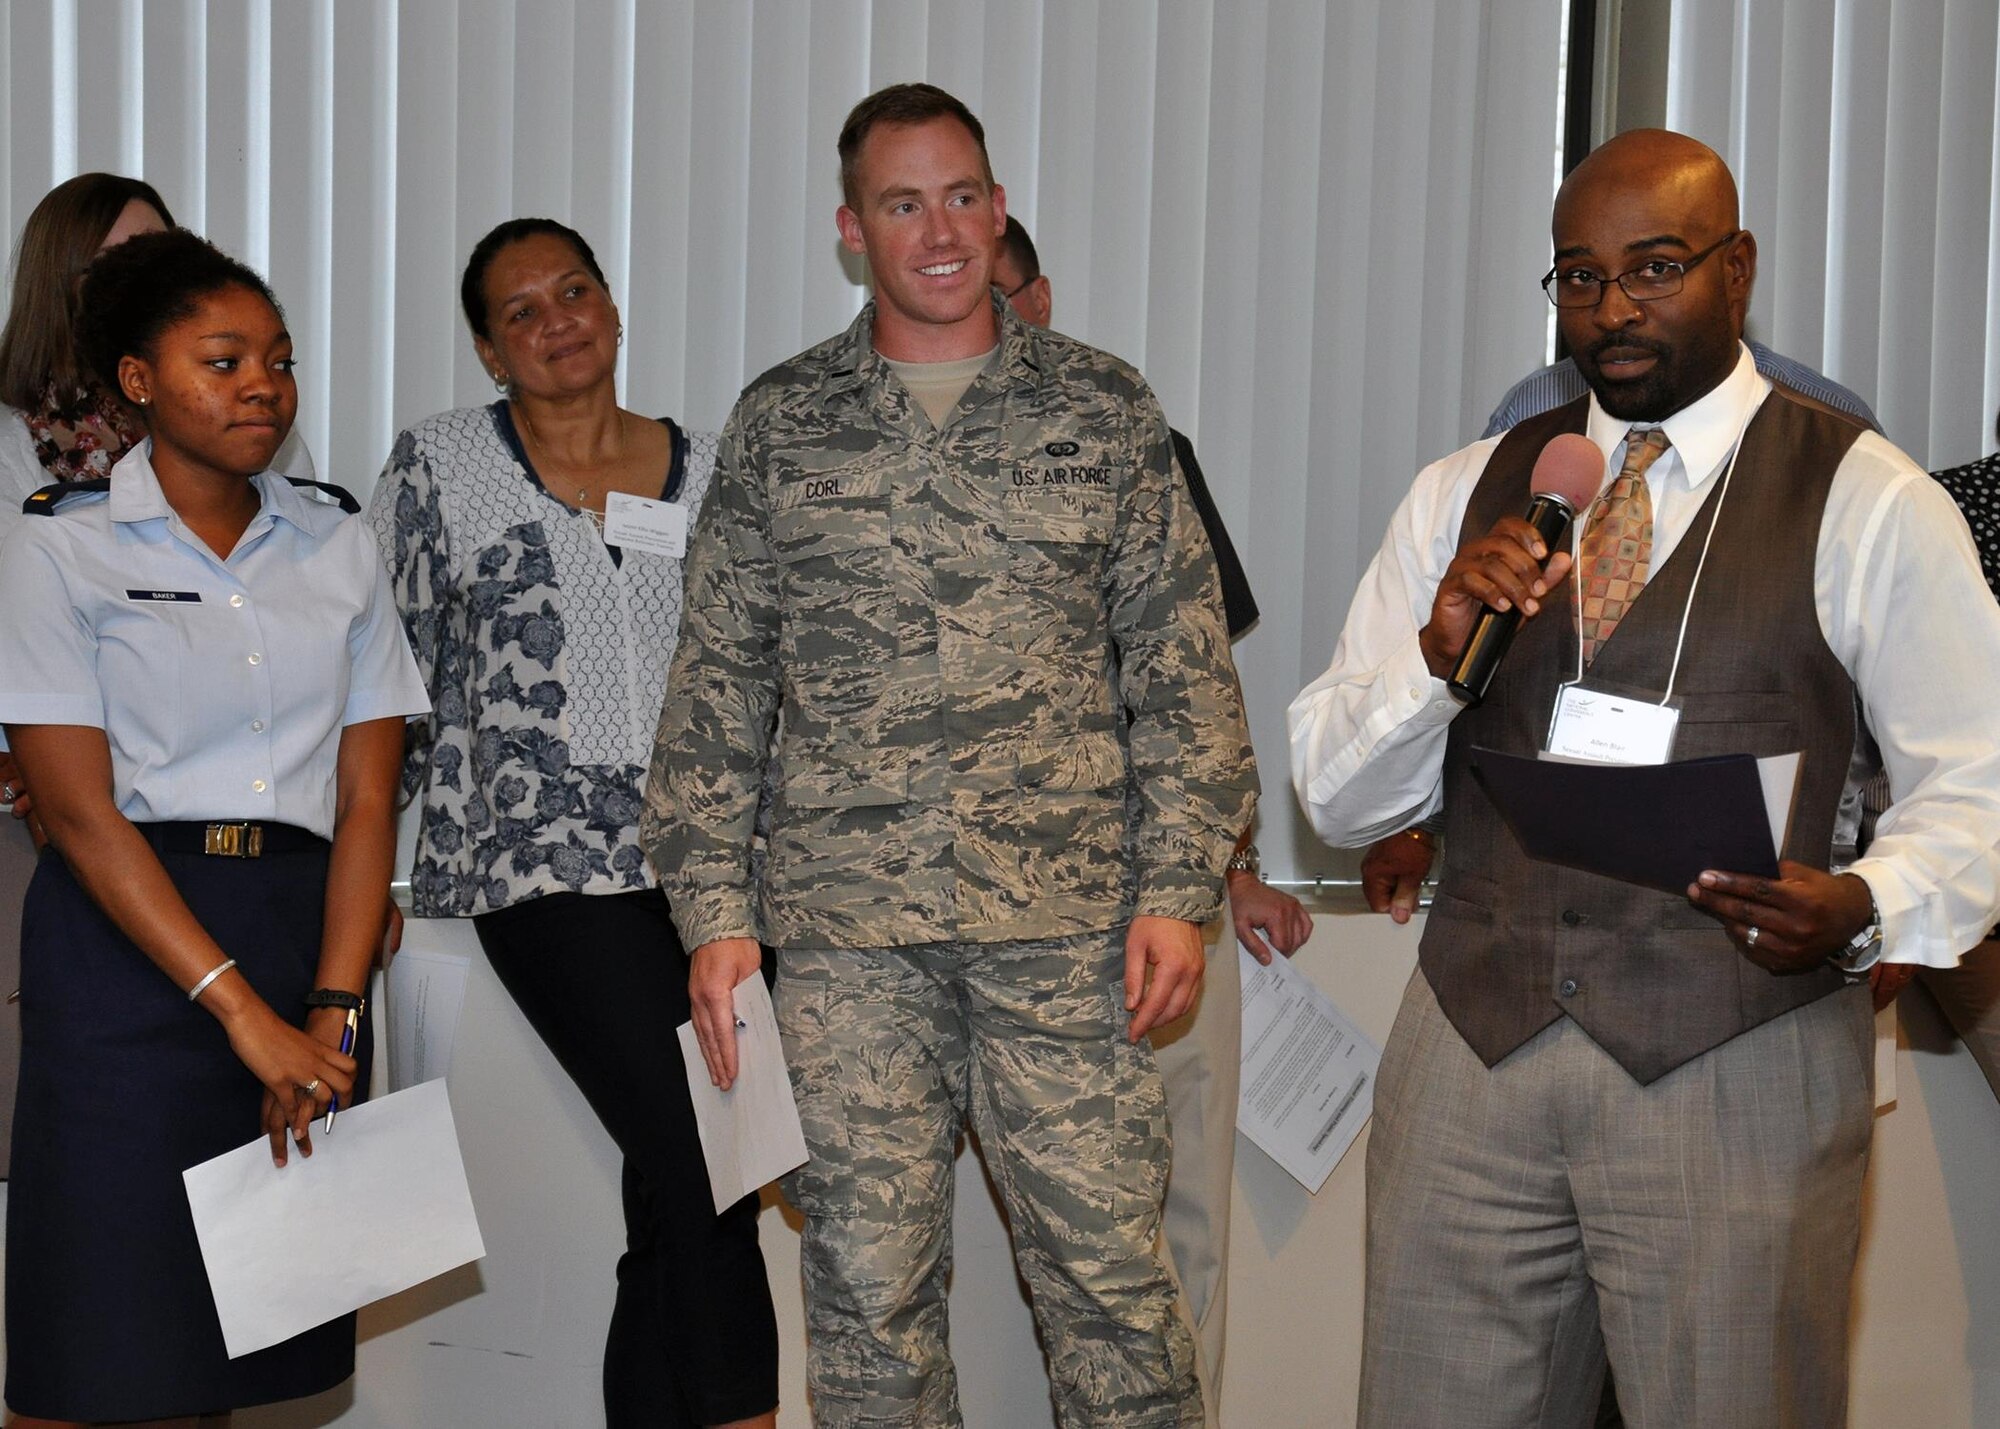 Allen Blair, a sexual assault response coordinator at Joint Base San Antonio-Randolph, Texas, provides his team’s feedback on the best approaches for communicating with leaders during a five-day SARC annual refresher course at the National Conference Center in Leesburg, Va., Aug. 5, 2015. Nearly 130 SARCs from across the Air Force attended the training, which included lessons on prevention, policy, training and leadership interaction. (U.S. Air Force photo/Tech. Sgt. Bryan Franks)